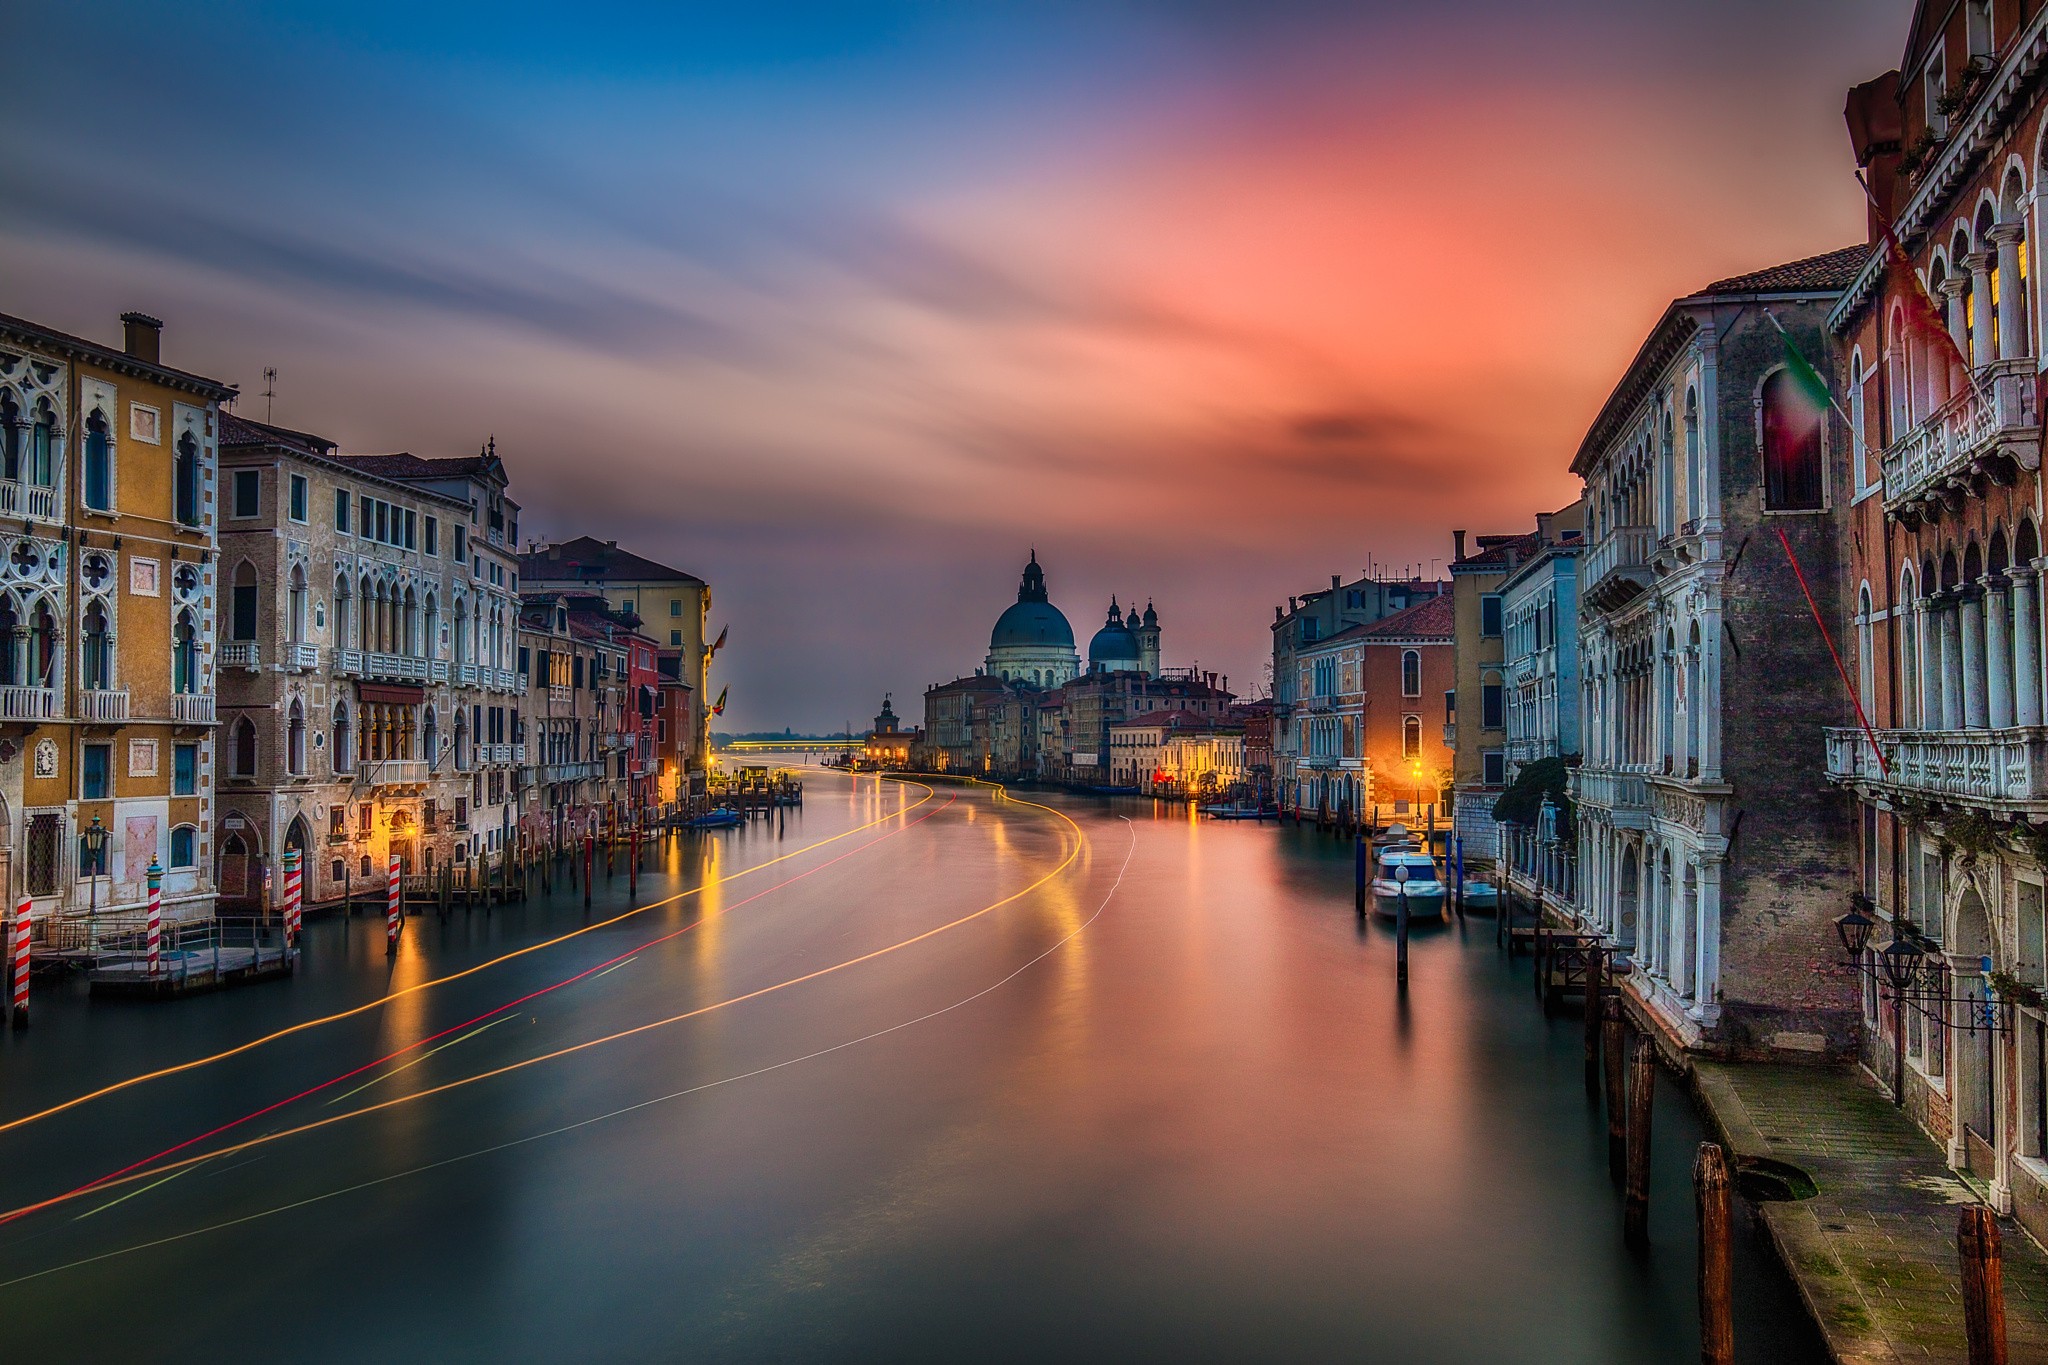 General 2048x1365 Venice Italy city canal